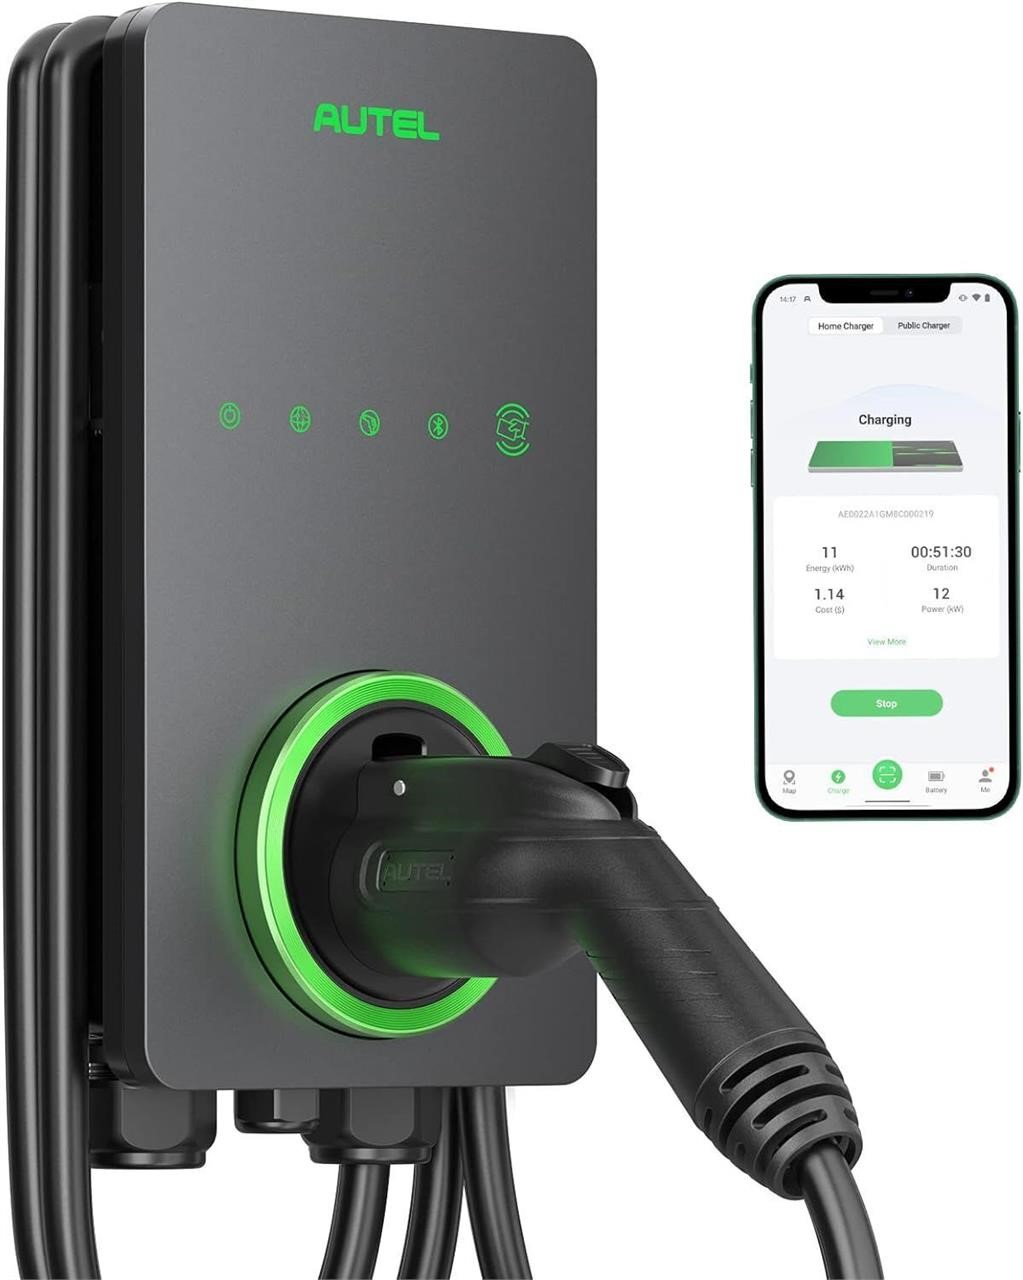 ULN - Autel Electric Vehicle (EV) Charger